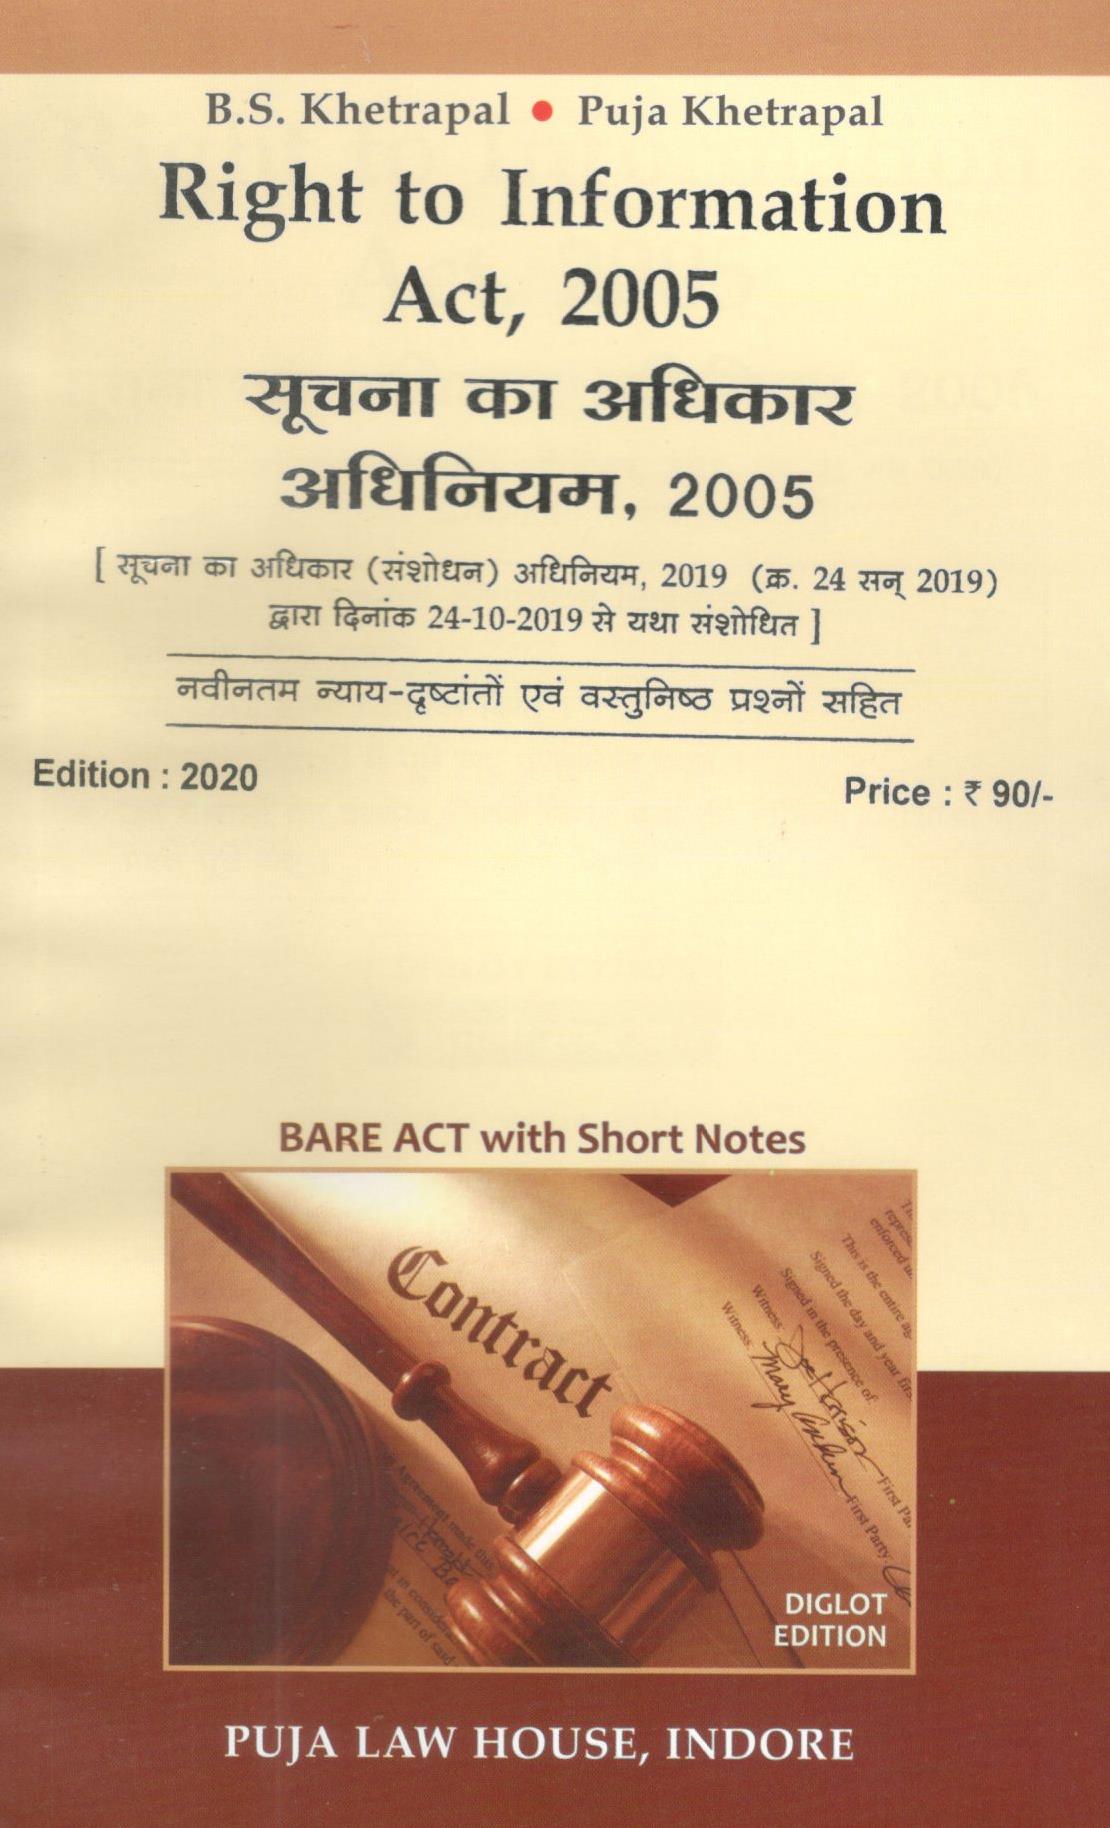  Buy Right to Information Act, 2005 / सूचना अधिकार अधिनियम, 2005